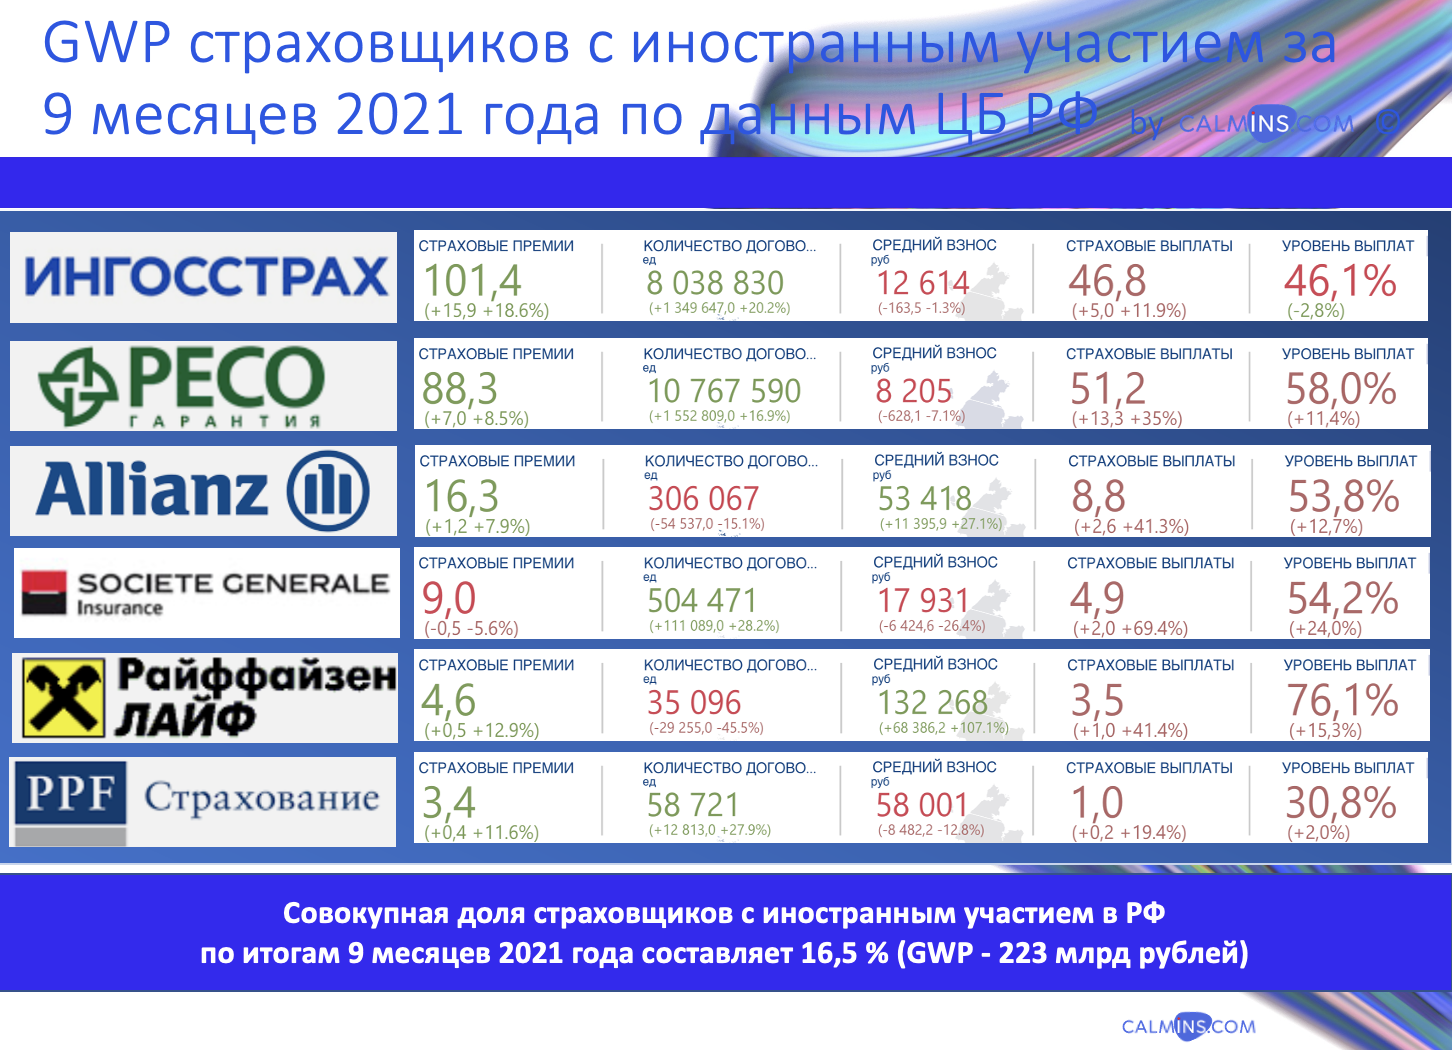 Top 10 main events of Russian Insurance Market - expert opinion